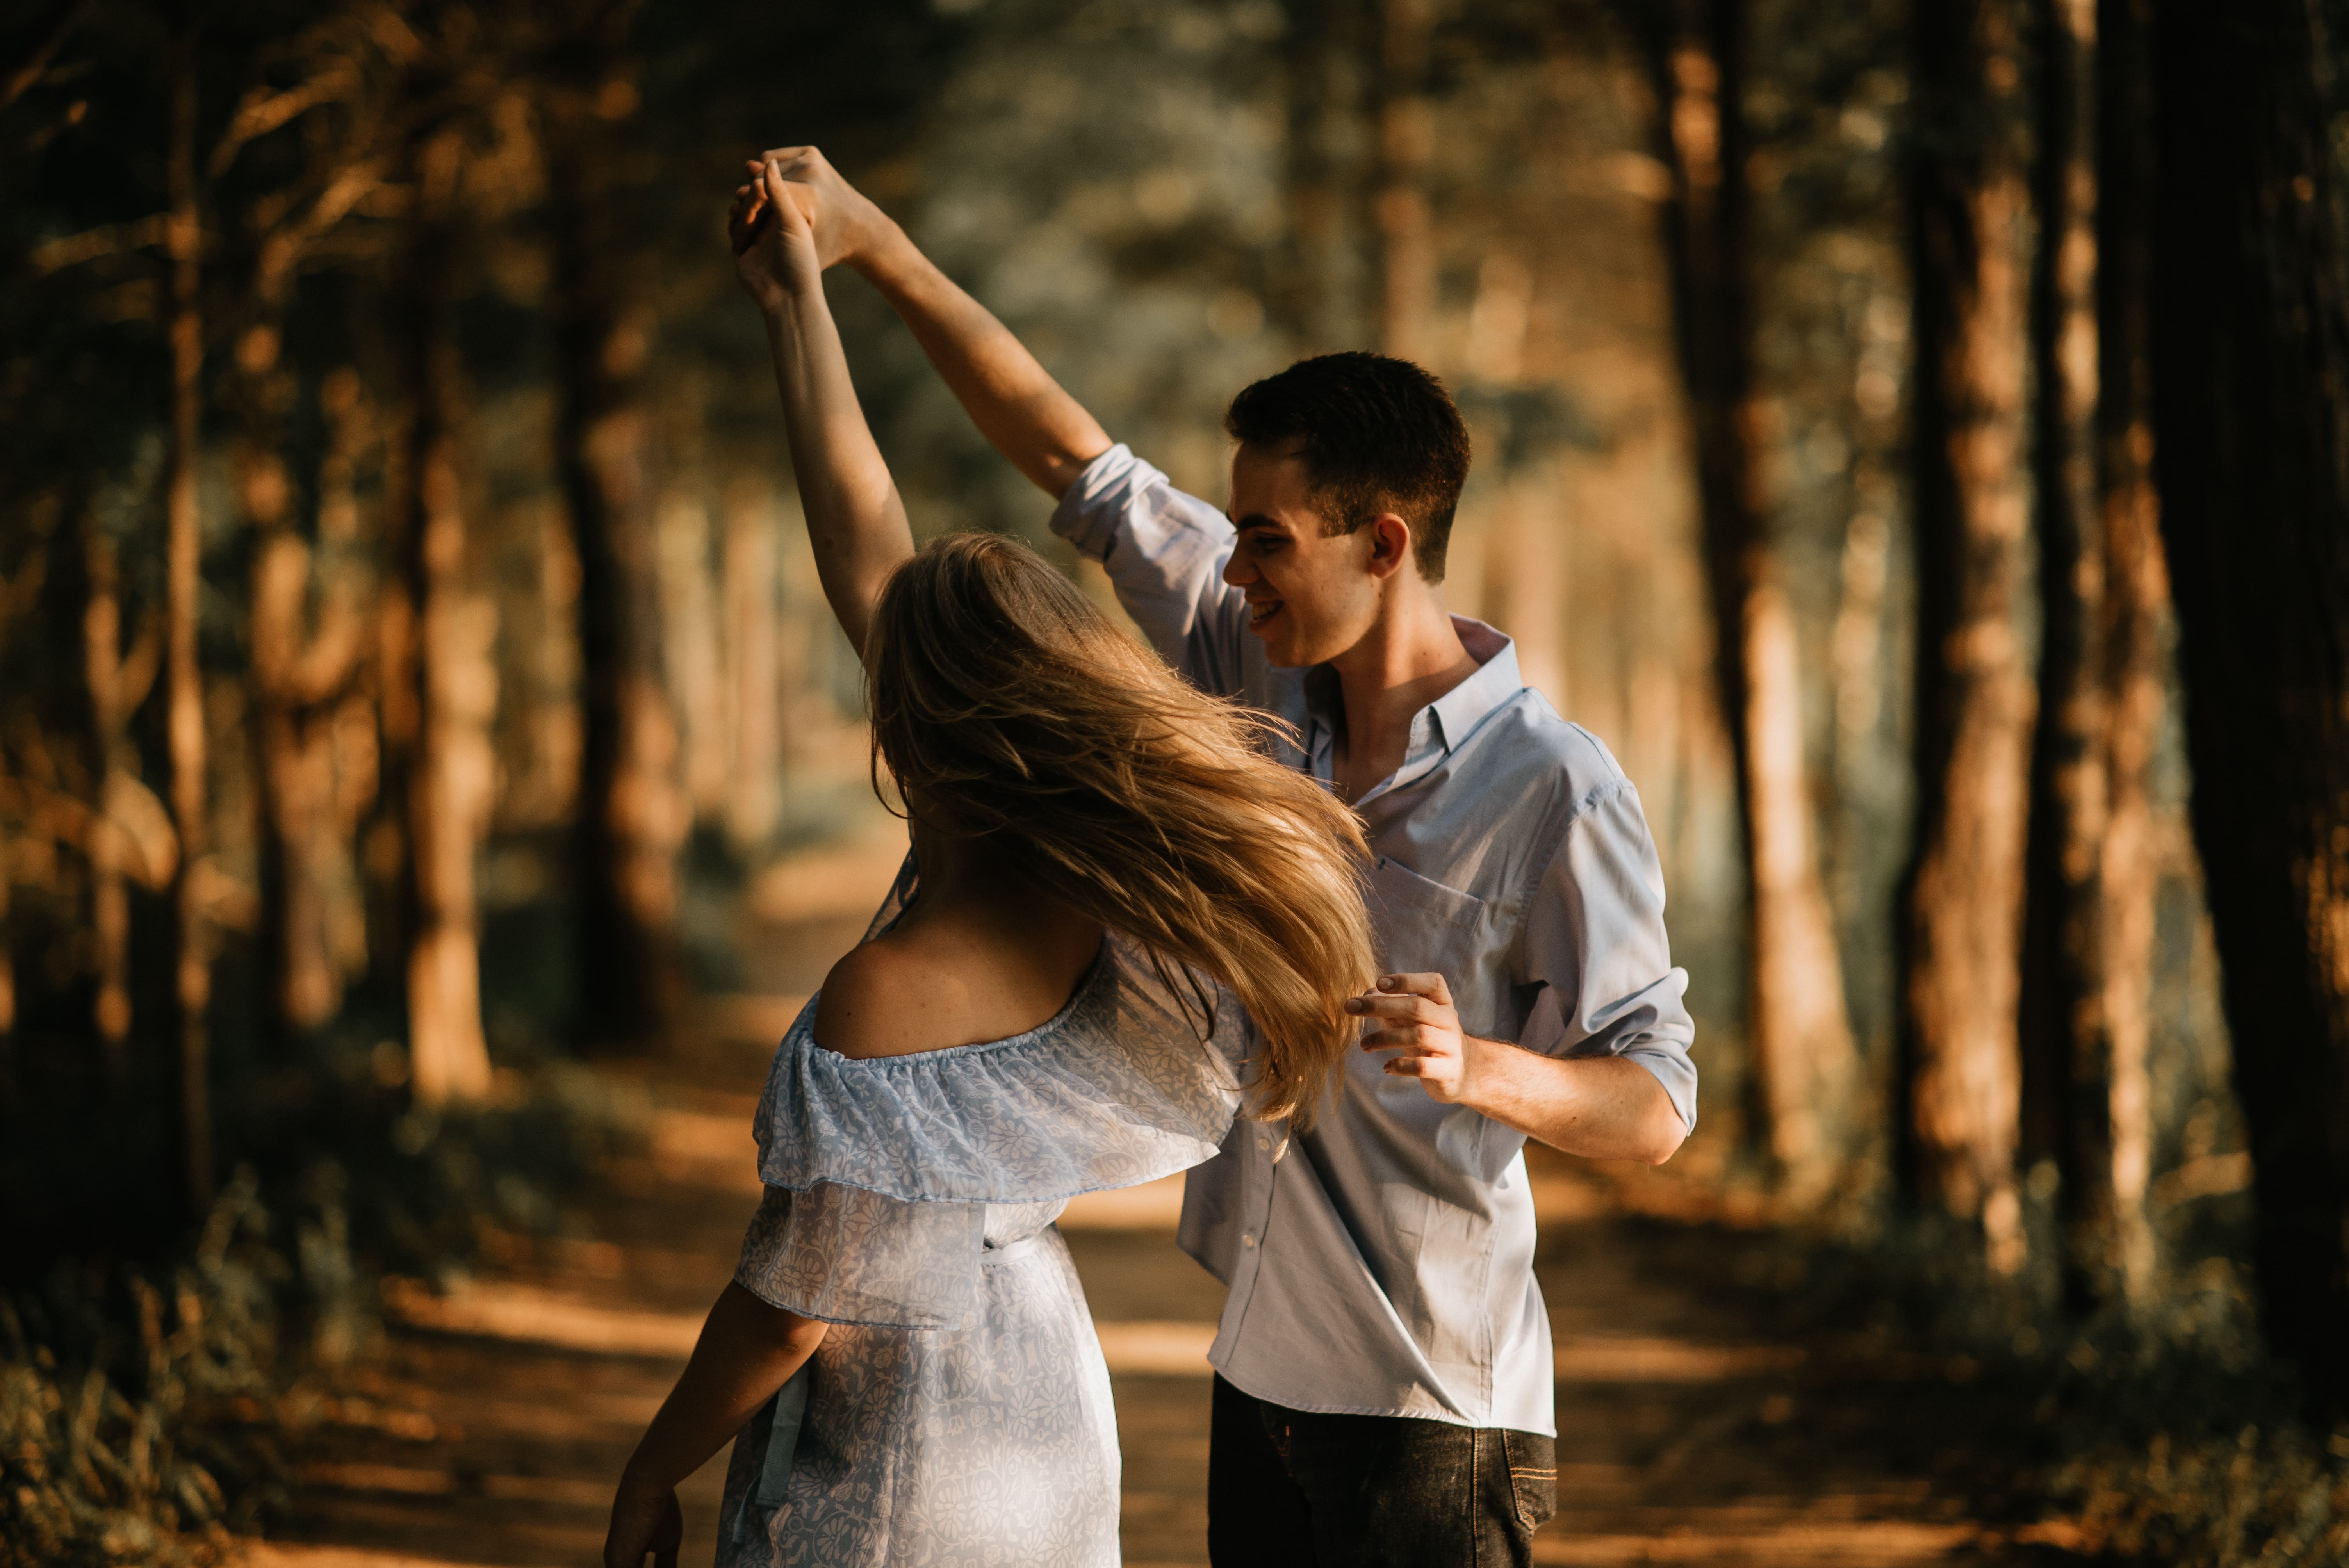 A couple dances in the forest